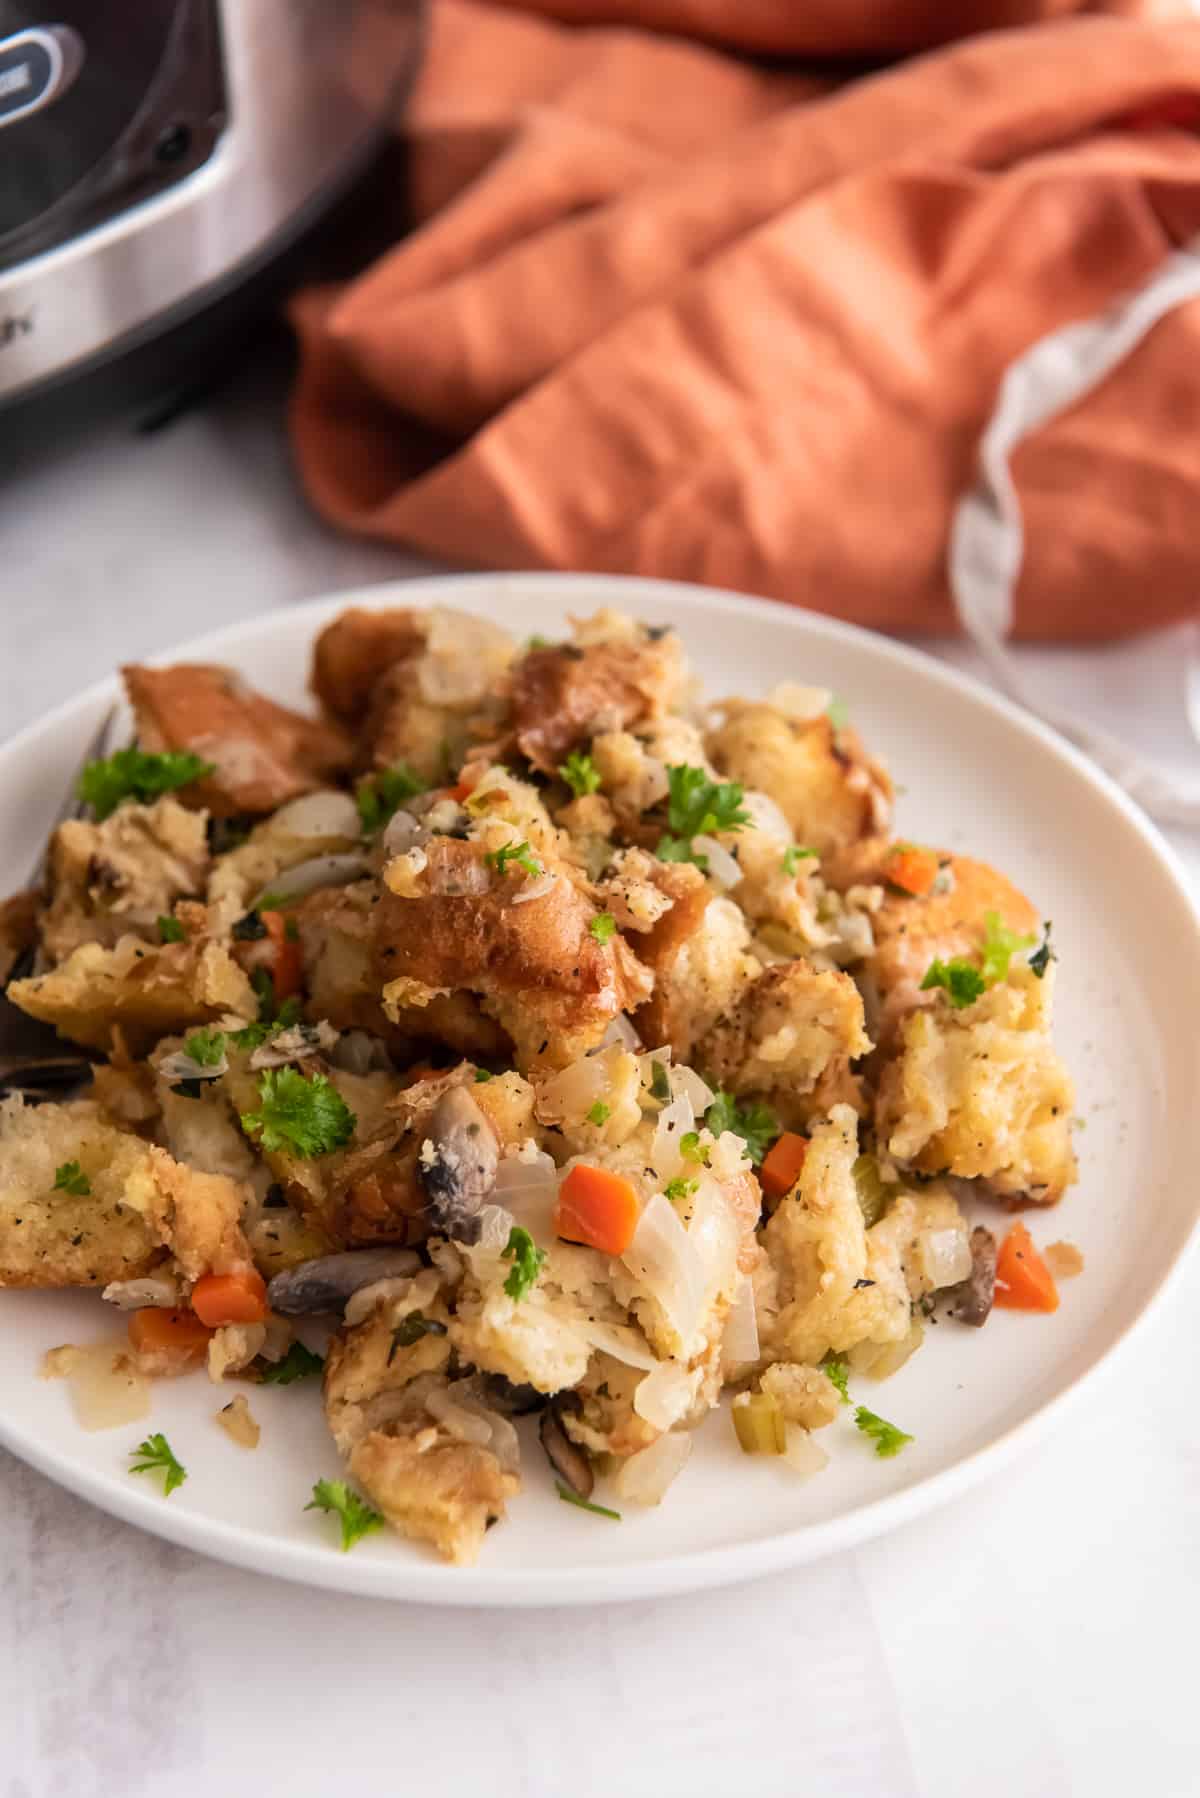 A plate filled with stuffing in front of a slow cooker.